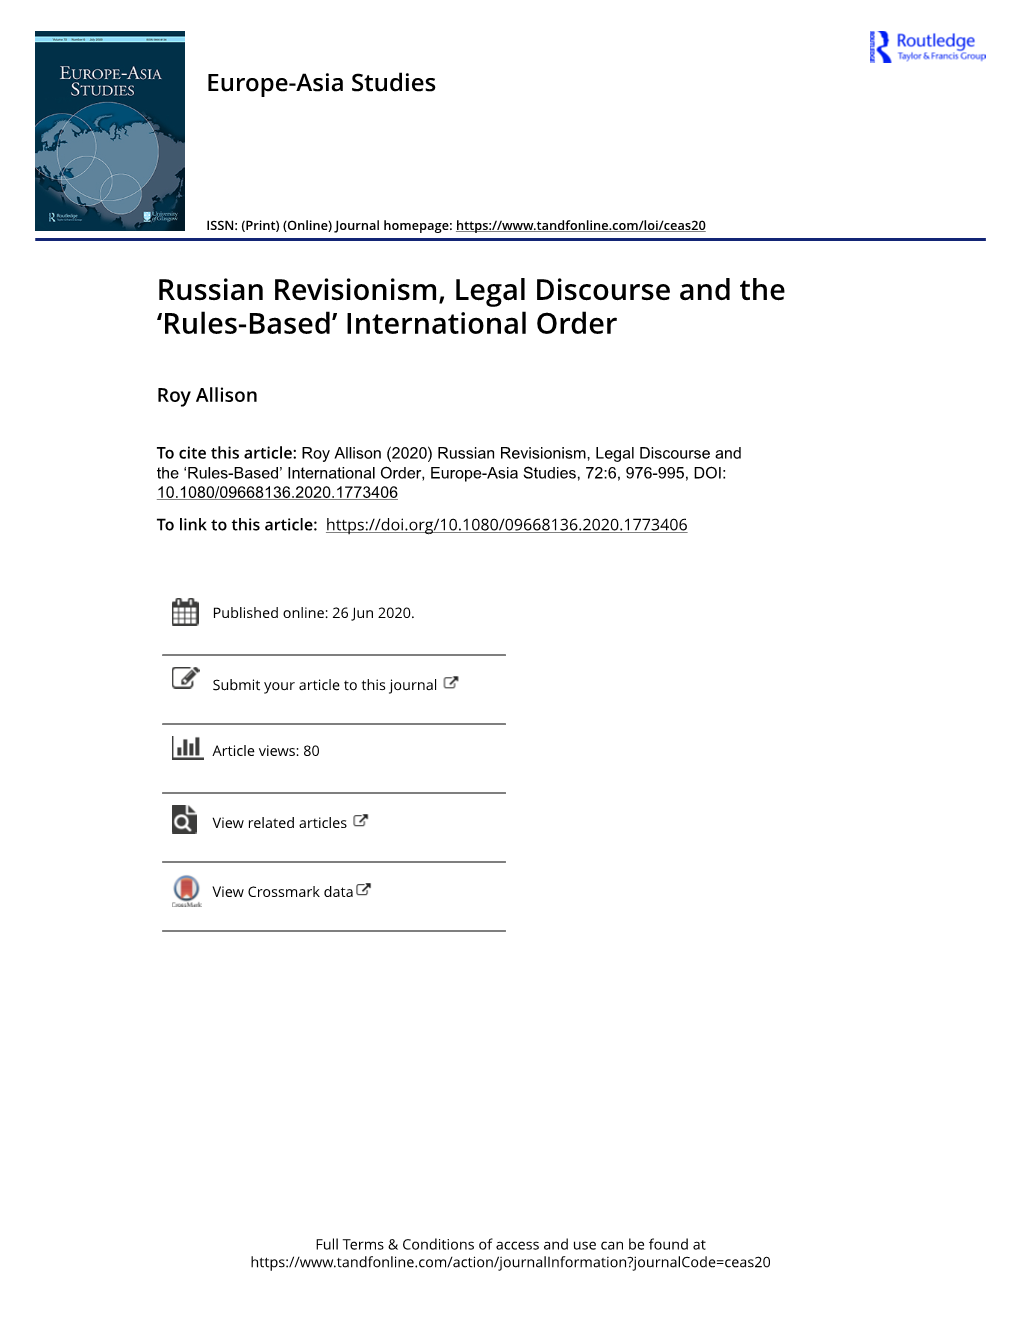 Russian Revisionism, Legal Discourse and the 'Rules-Based' International Order